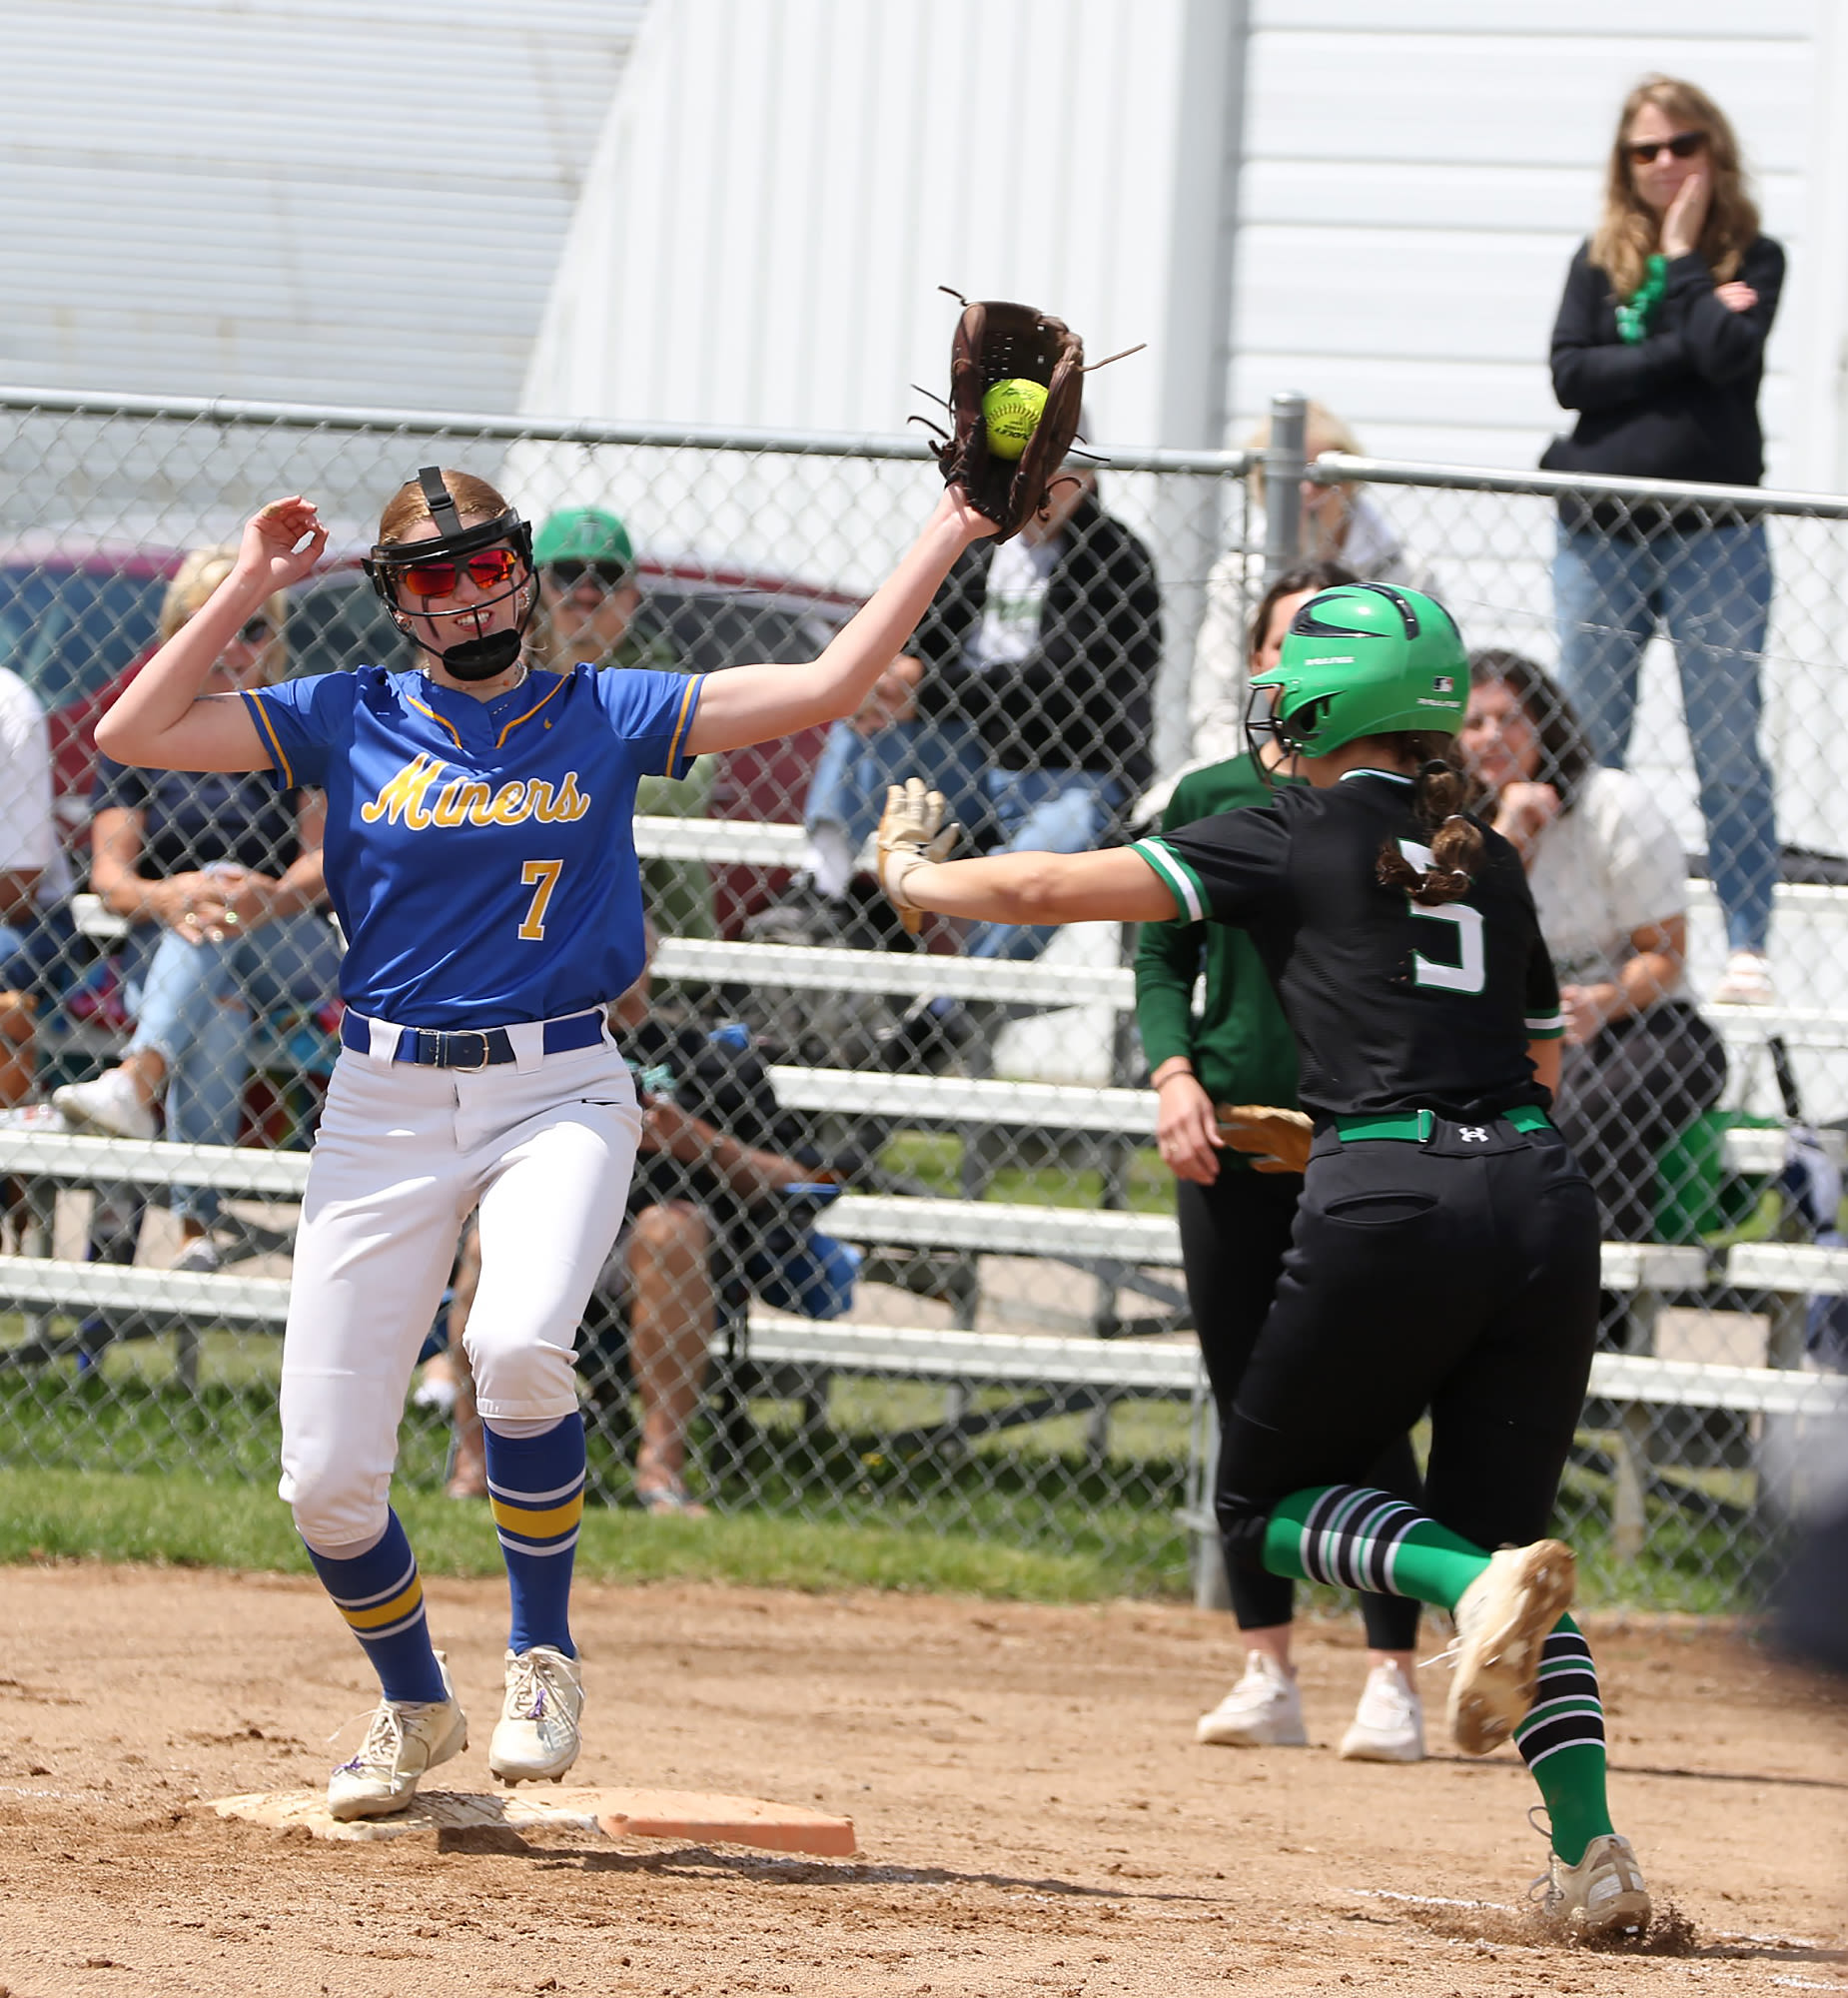 Stiff pitching lifts Beulah past Thompson in Class B softball state quarterfinals